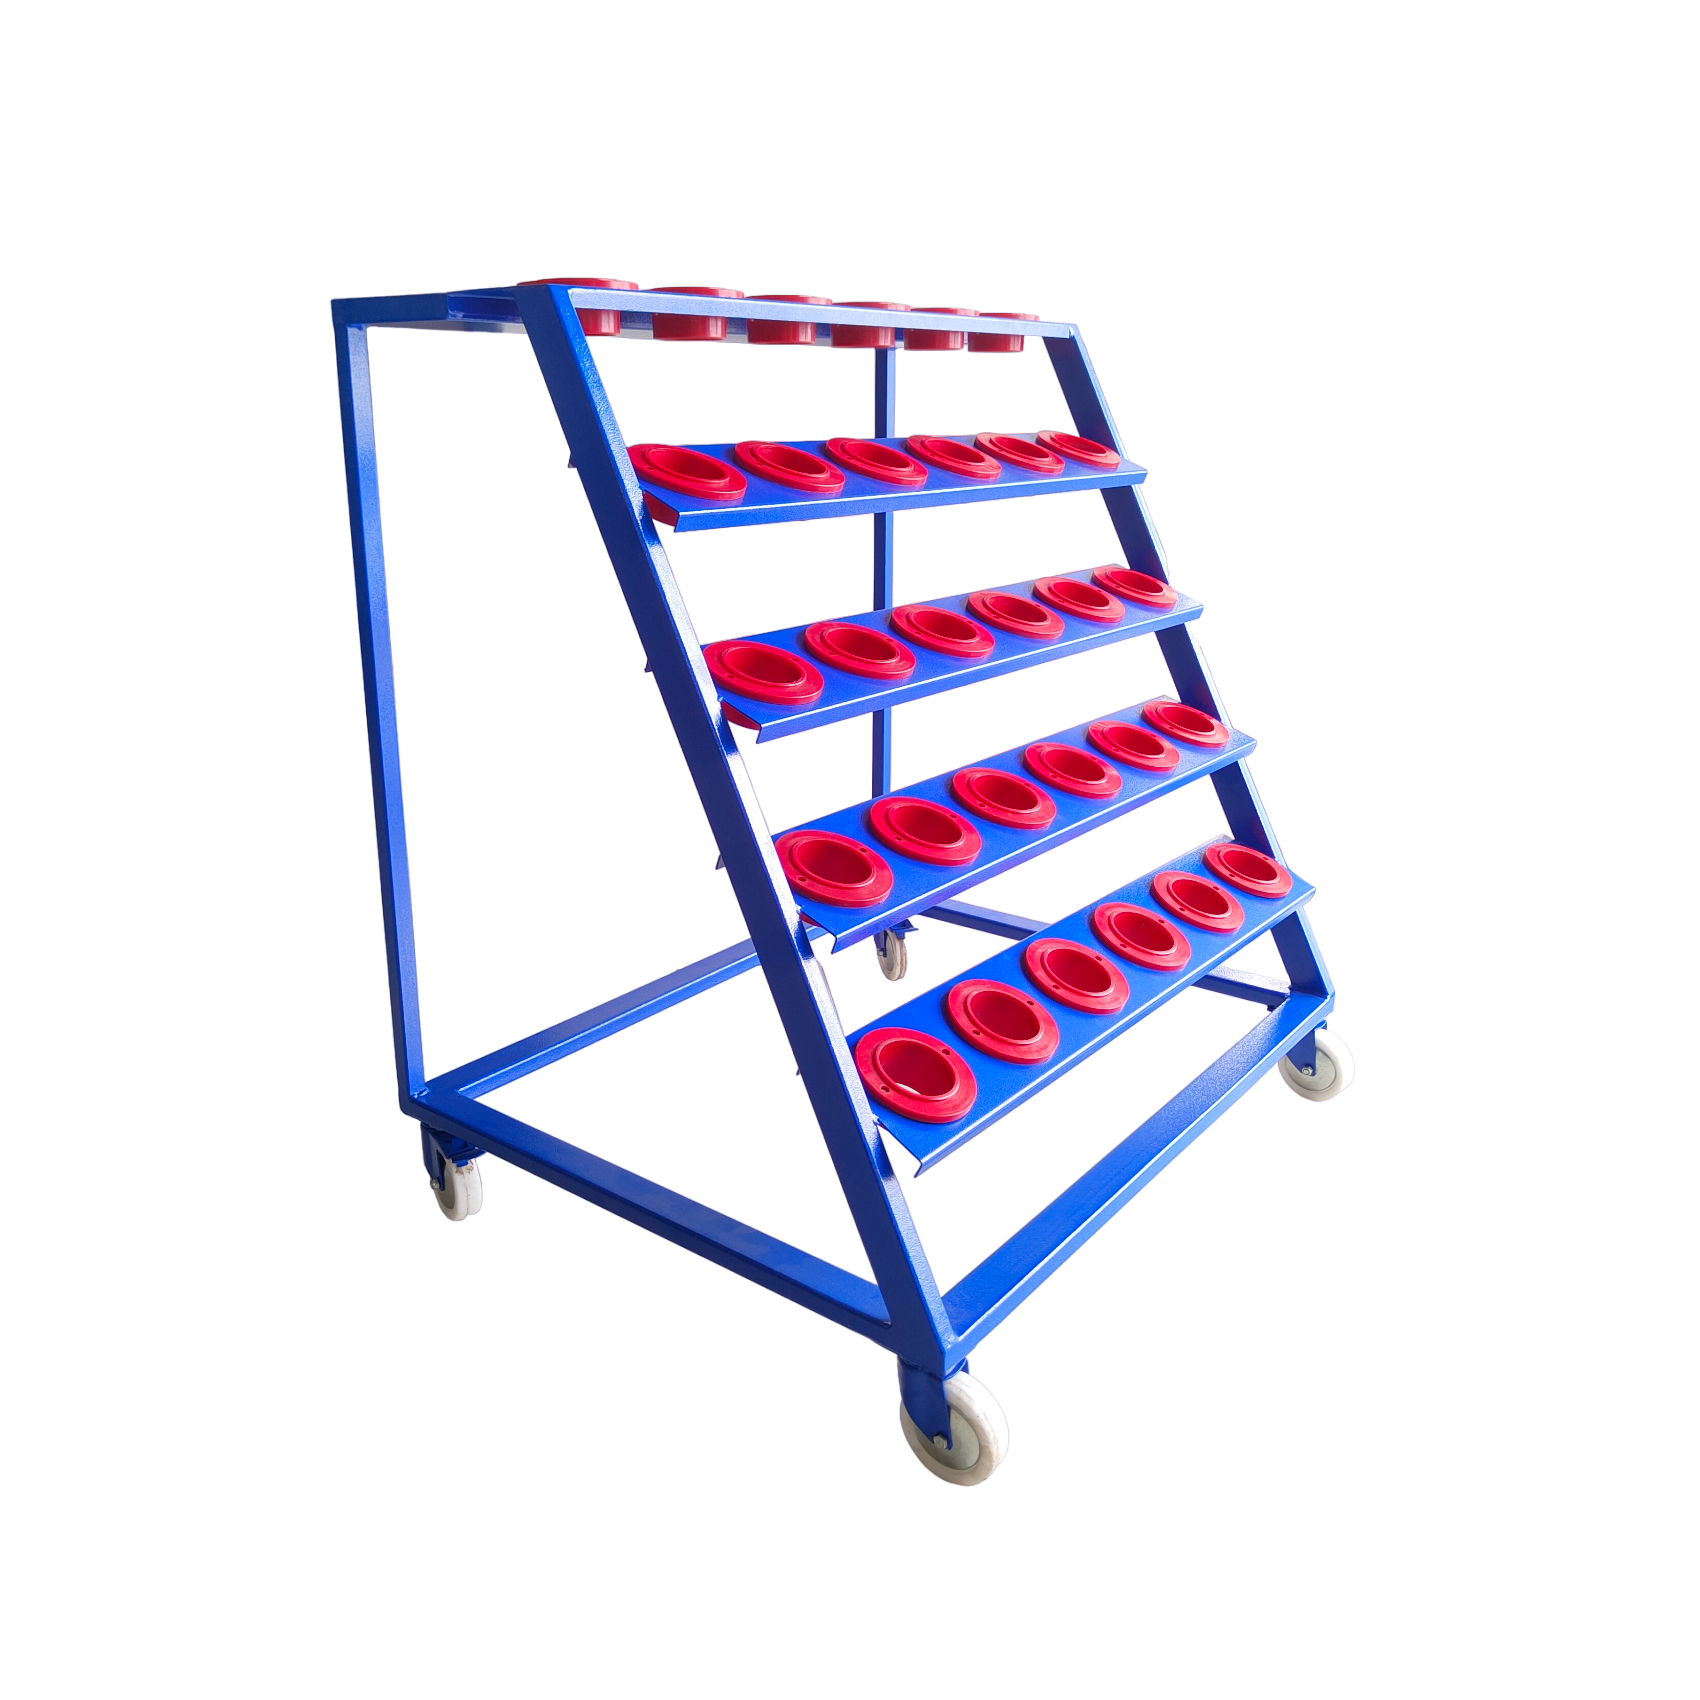 Technocart Tool Holder Trolley for HSK-100 with 5 Racks & 30 Pockets